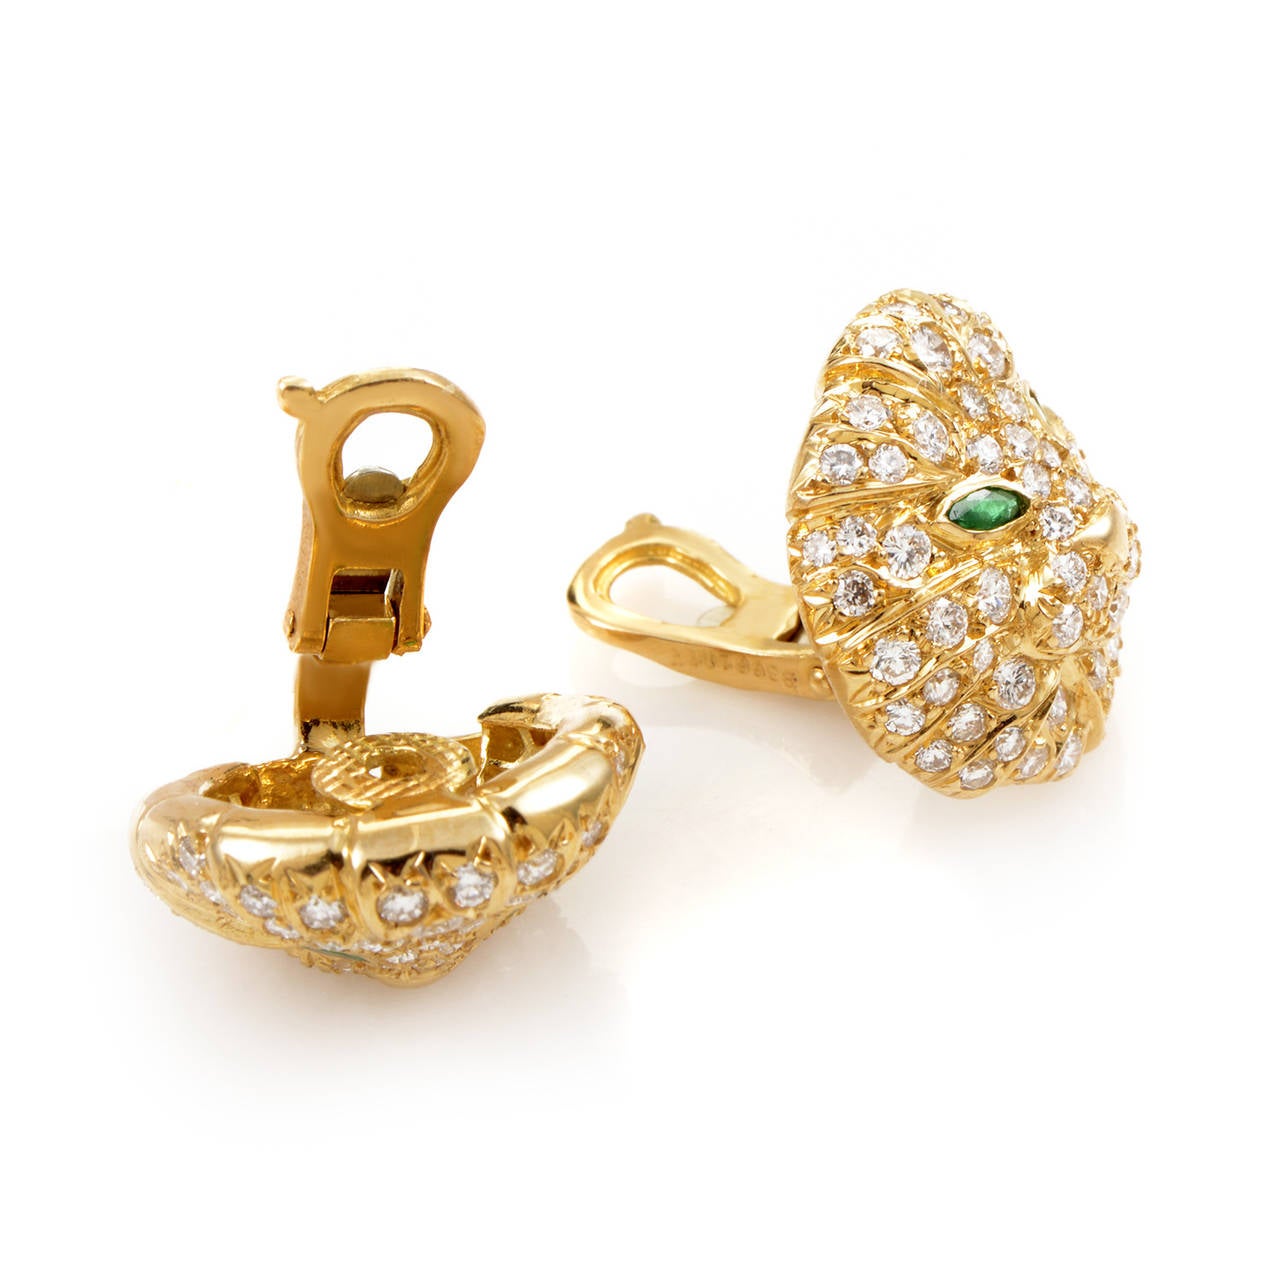 Two proud lions forged from gold are the perfect accessory for a fiercely unique and one-of-a-kind lady. As mentioned, these earrings from Boucheron are made of 18K yellow gold and boast a glittering diamond pave as well as fierce emerald